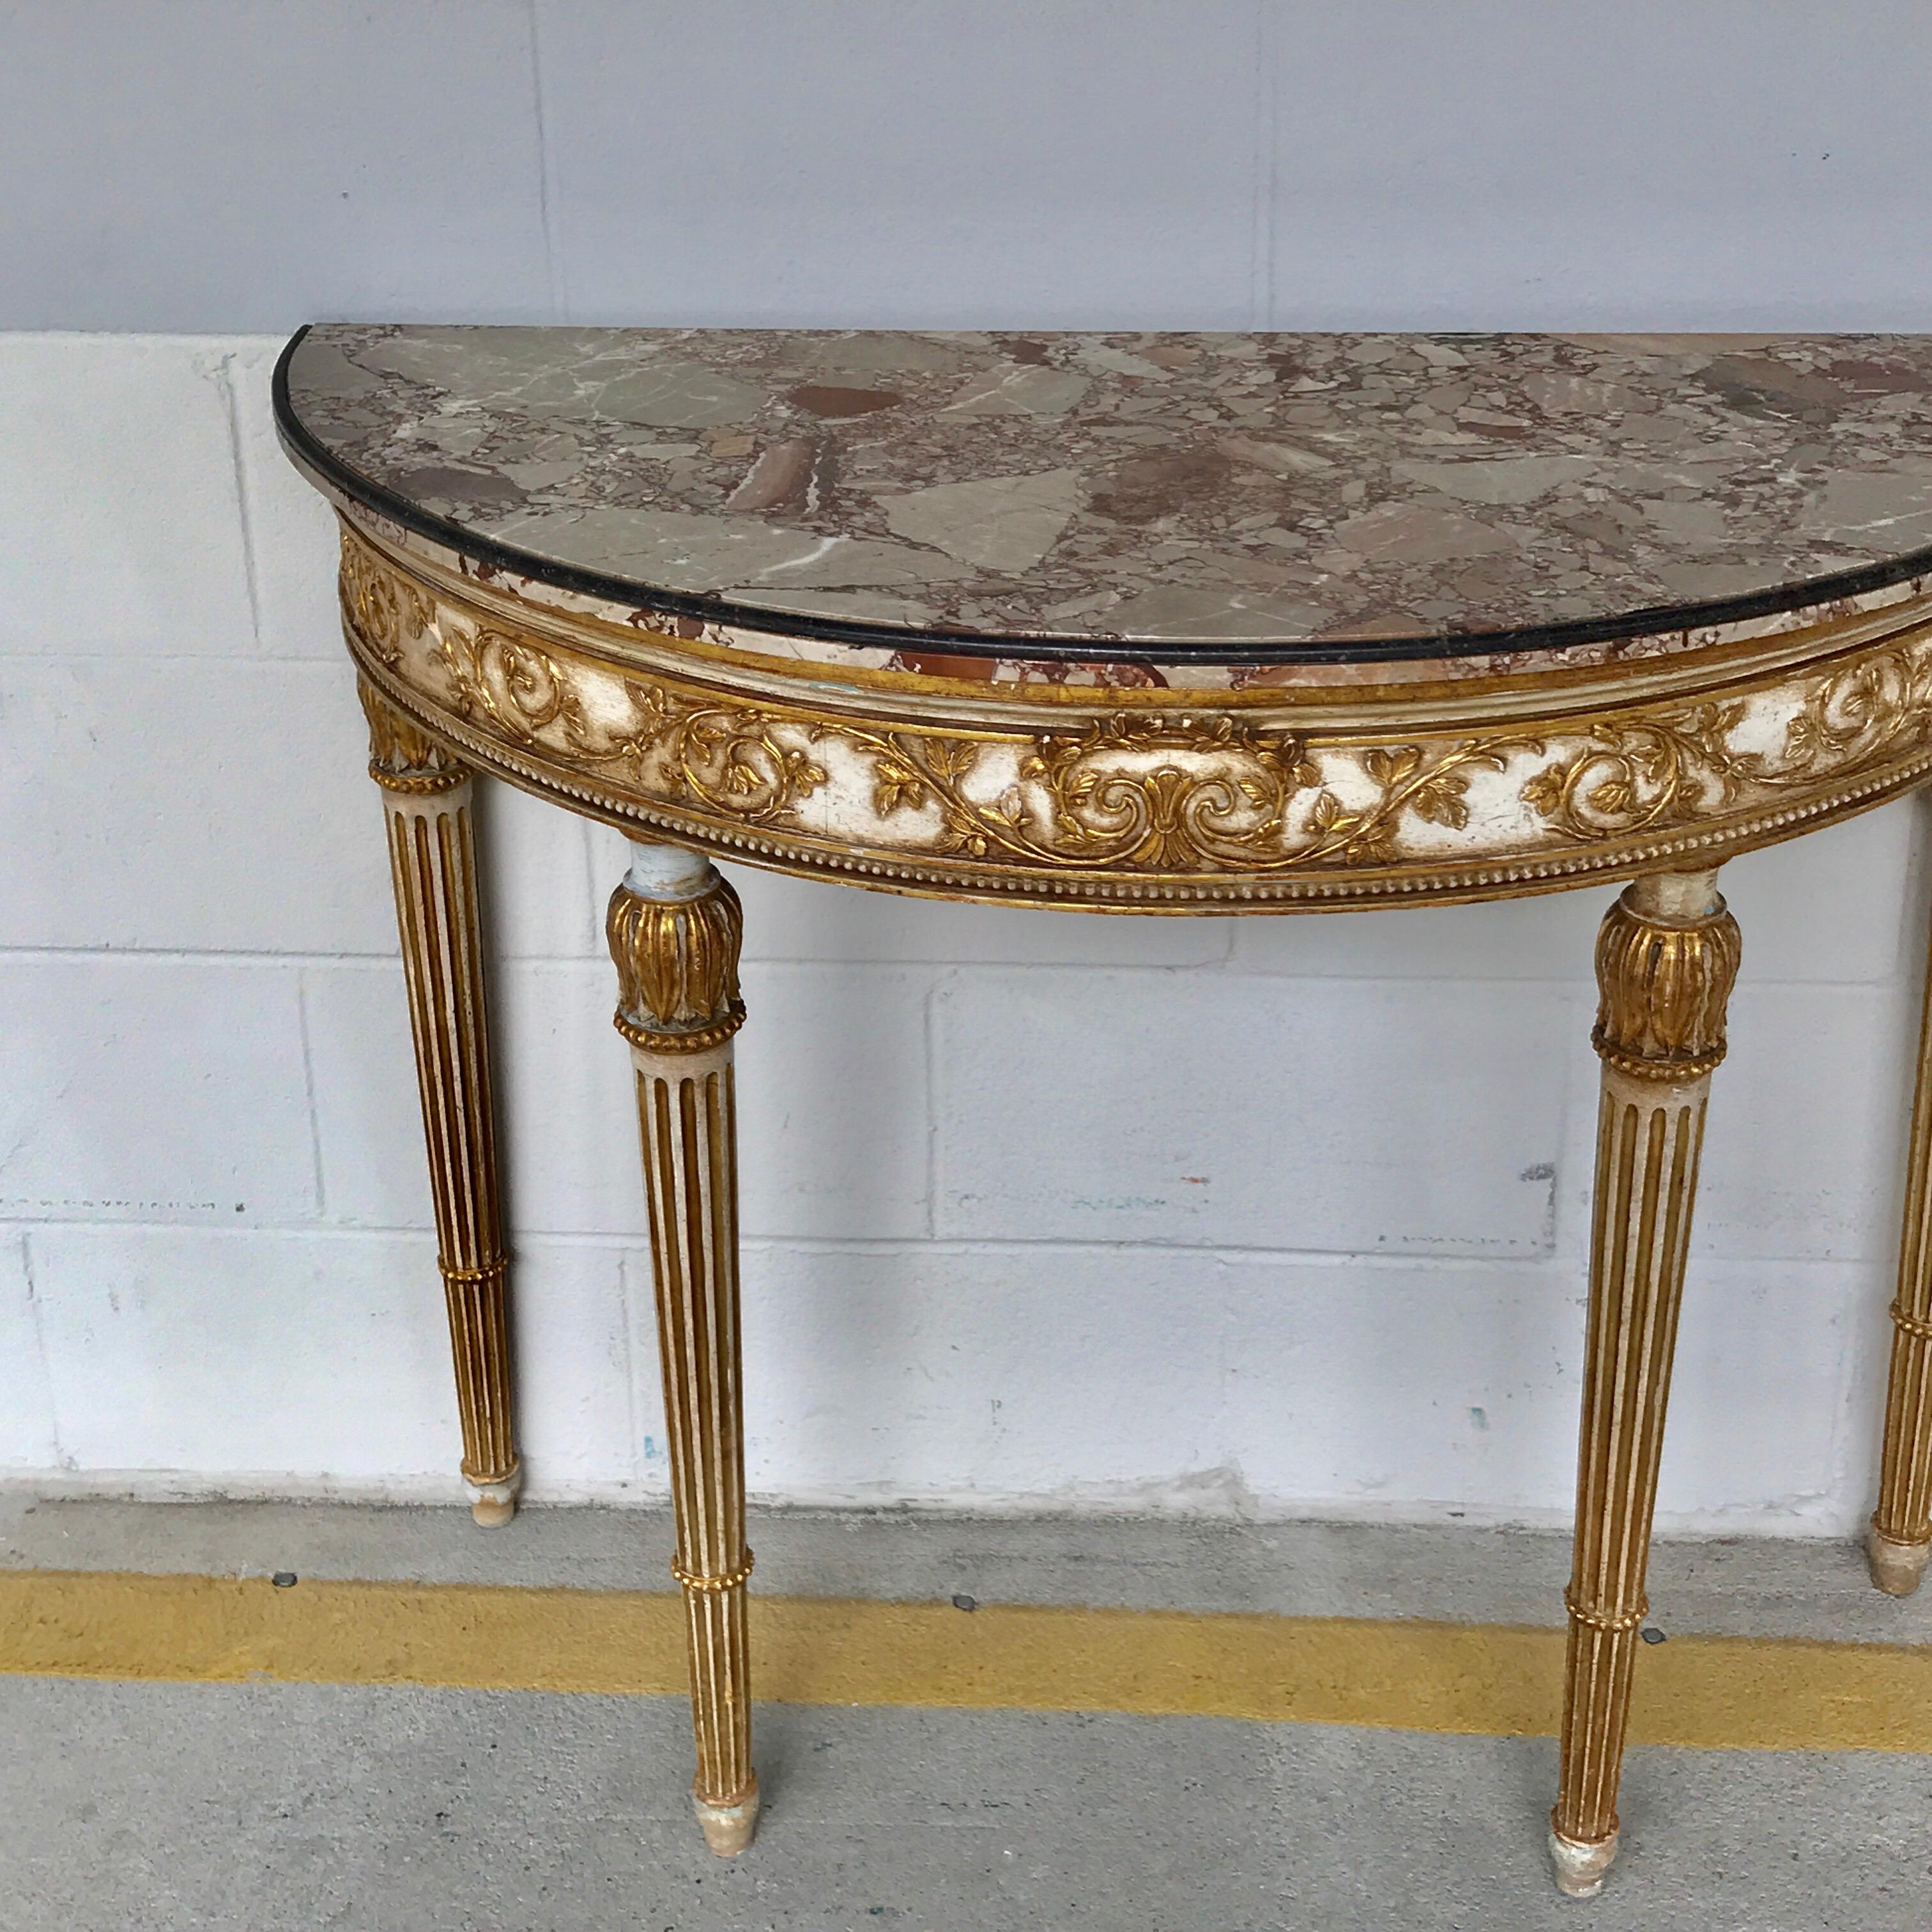 Italian neoclassical giltwood marble-top console, of demilune form with beautiful specimen marble top with inlaid black marble edge, raised on a conforming carved parcel gilt base with reeded legs.